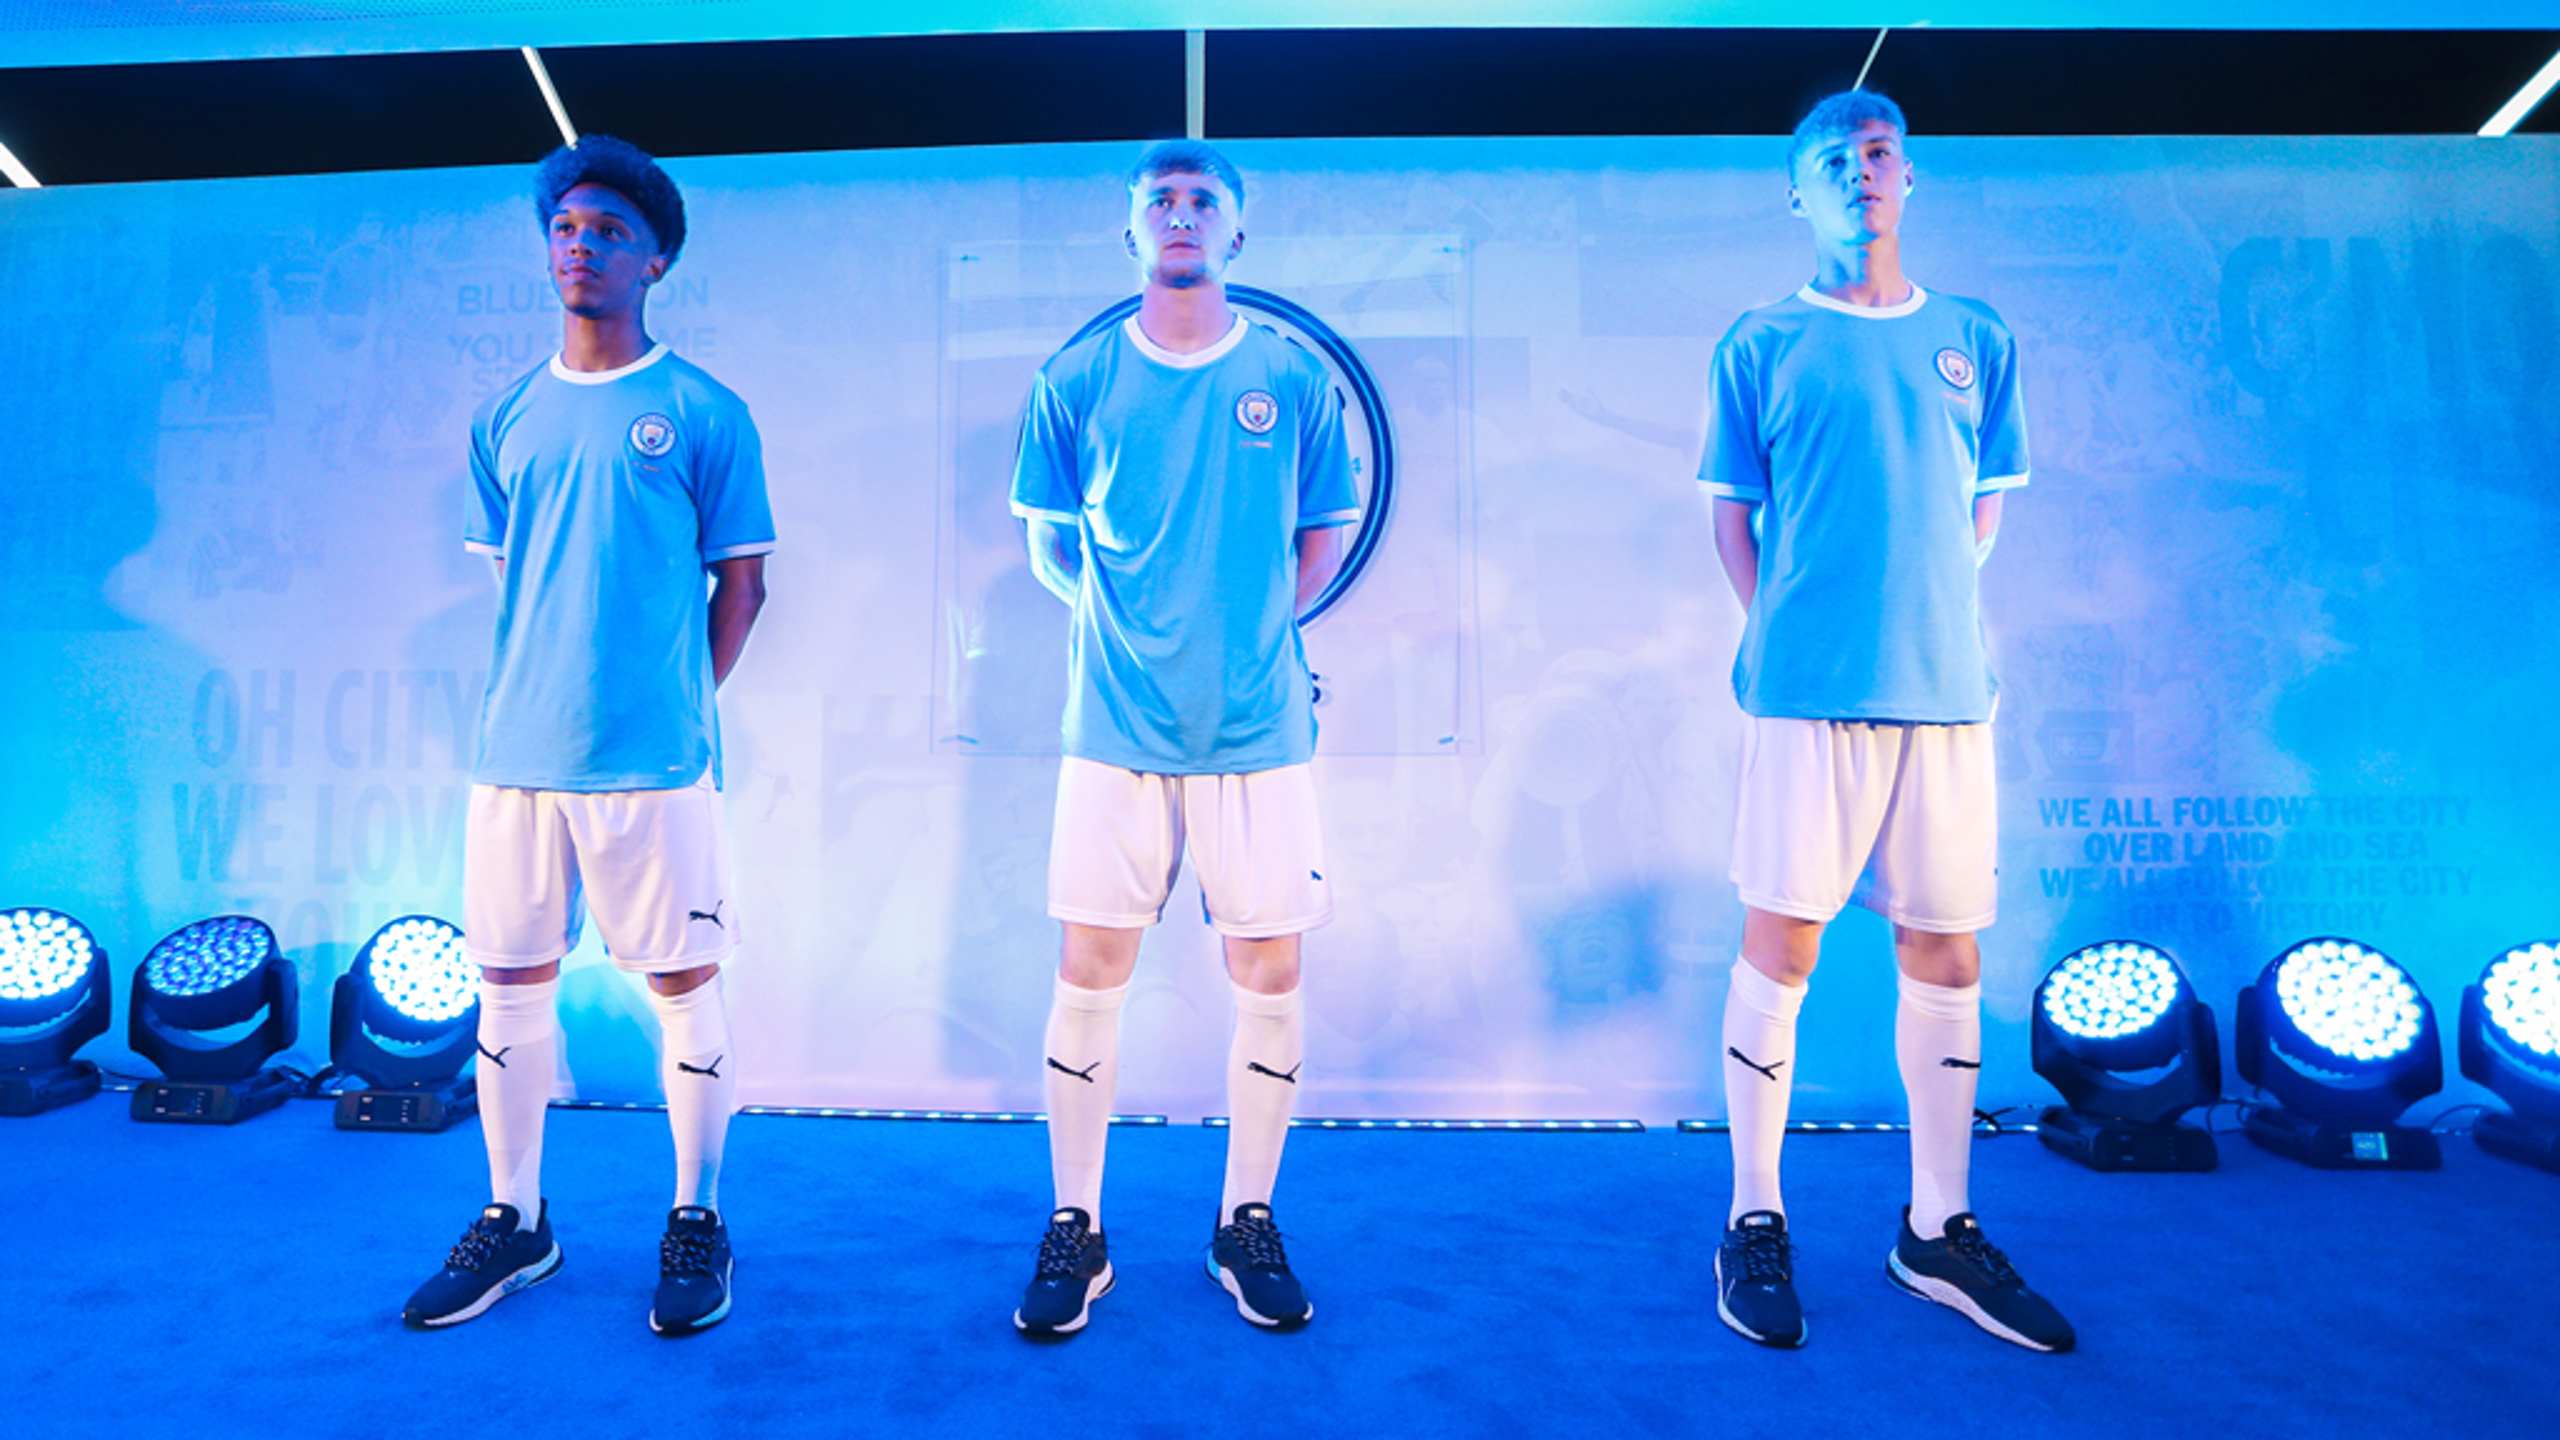 125 YEARS: Our anniversary kit was unveiled at a special fan event held at the City Football Academy 